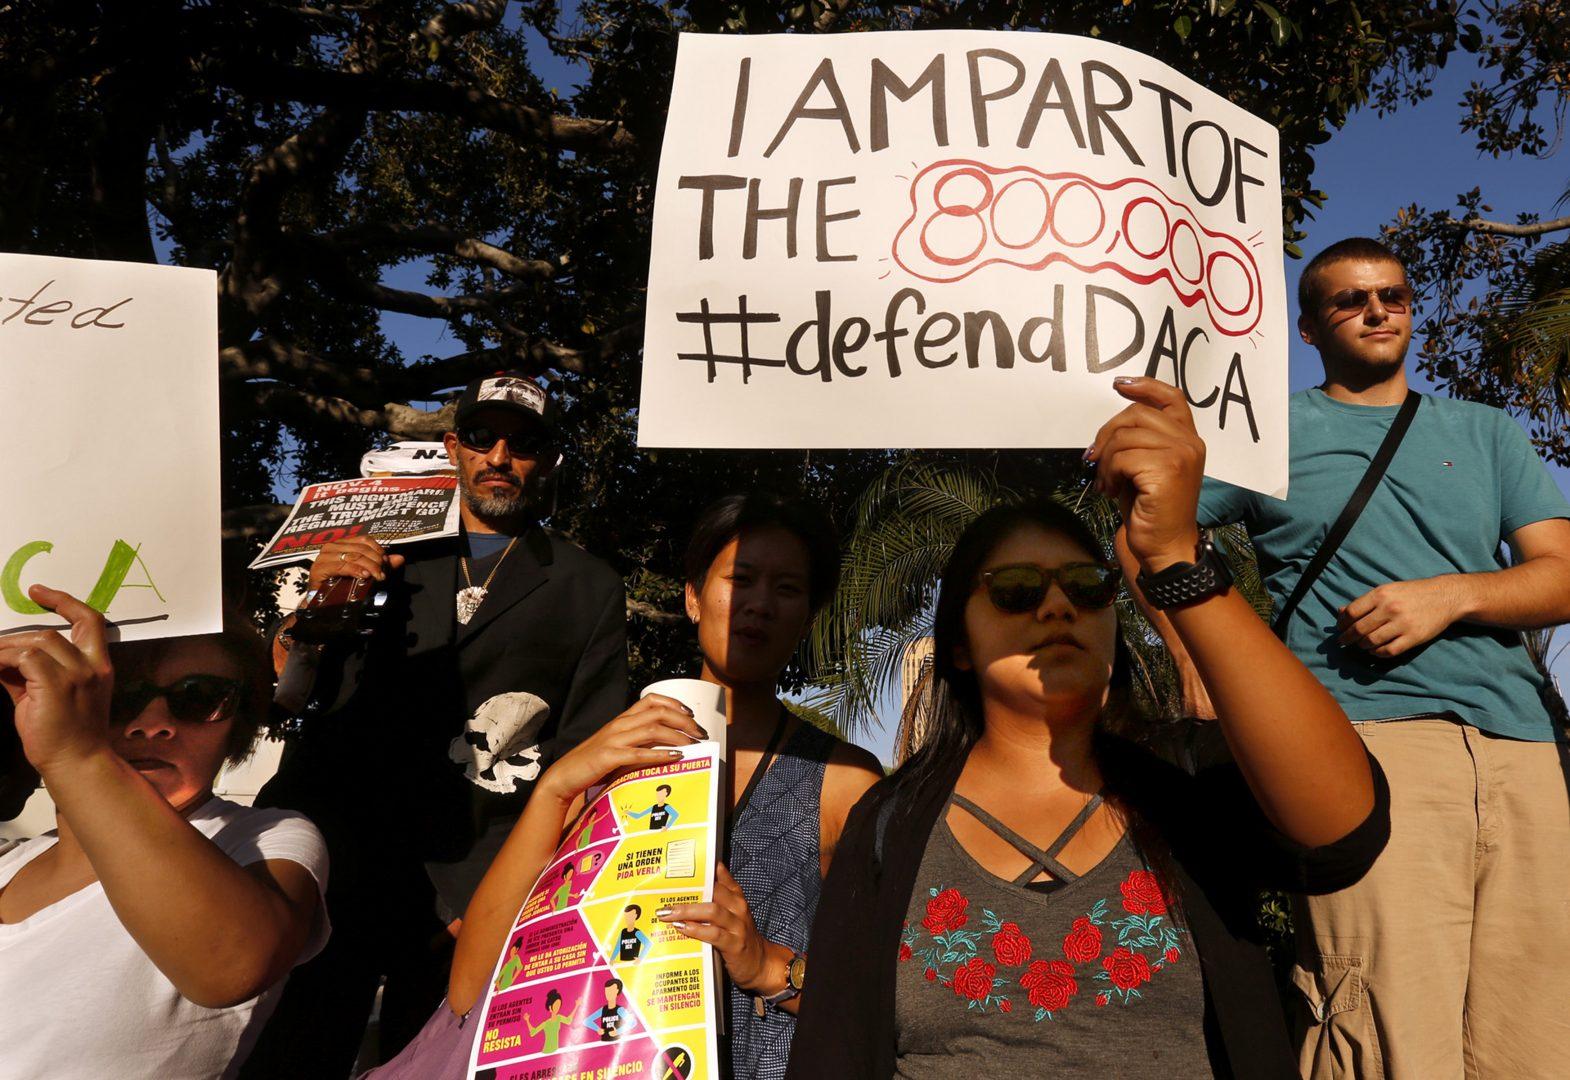 Los Angeles Harbor College student Brenda Soriano, second from right, and her mother Edilbertha Martinez, left, participate in a rally in support of the Deferred Action for Child Arrivals, or DACA program in Los Angeles on September 5, 2017. (Genaro Molina/Los Angeles Times/TNS)